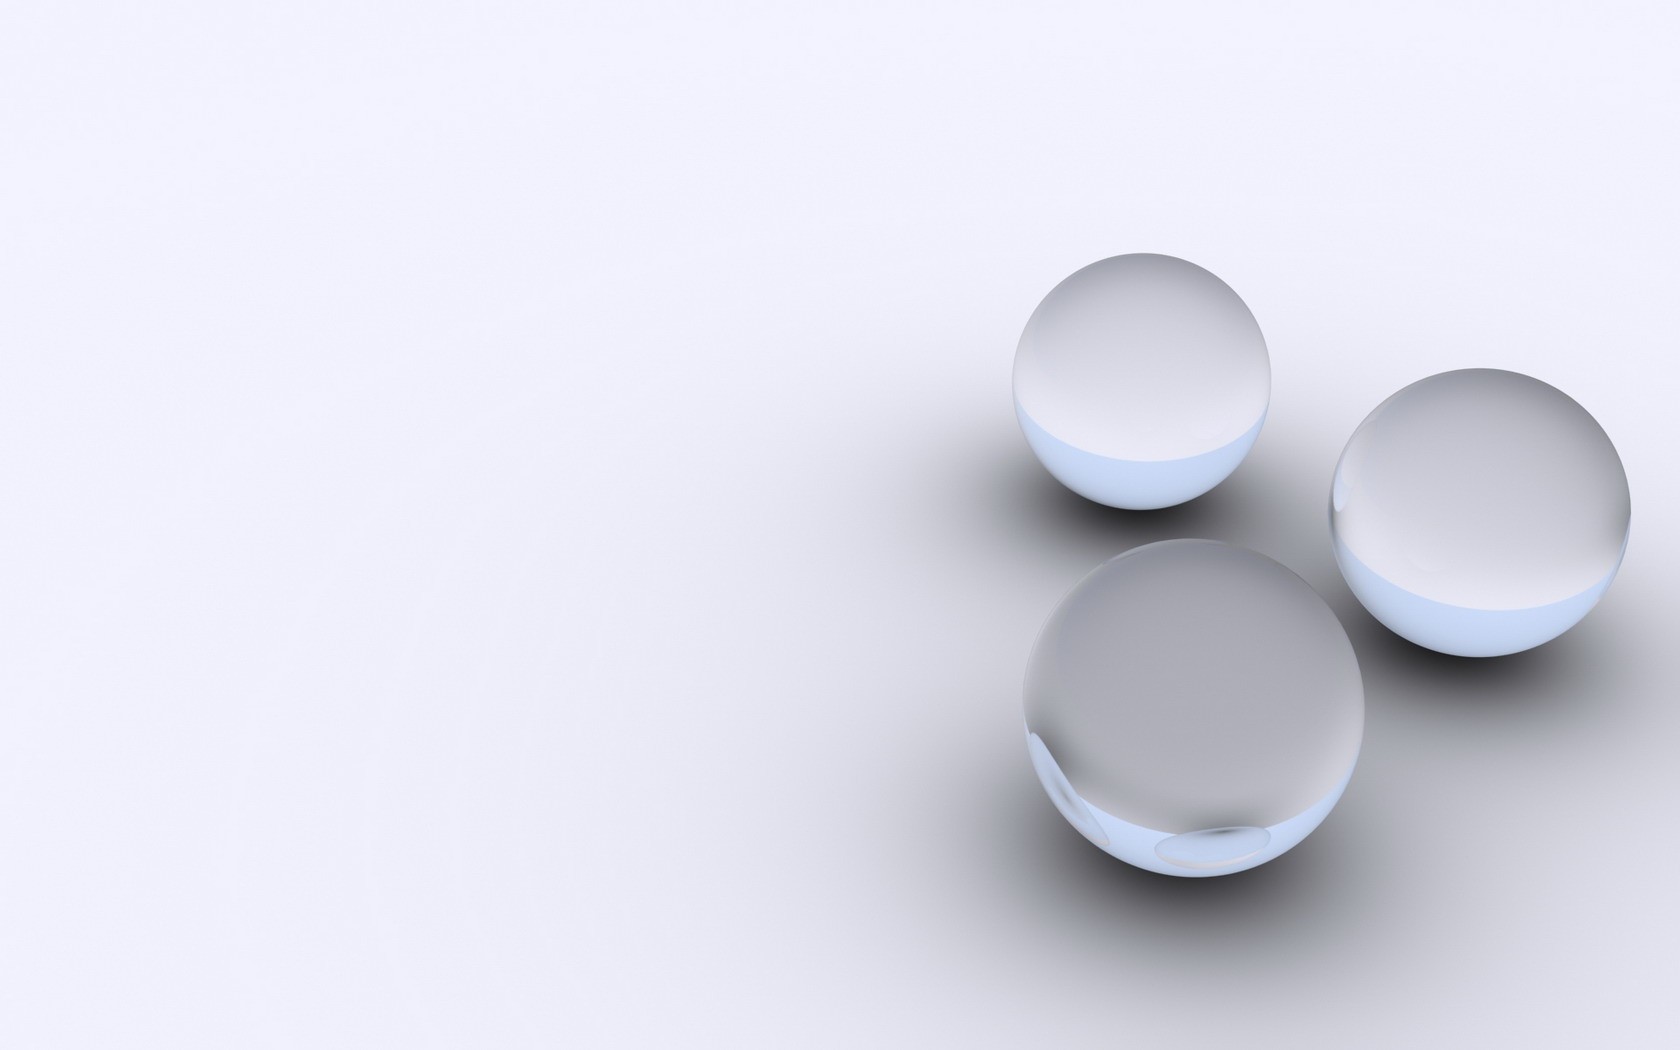 abstract minimalistic white balls silver wallpaper background